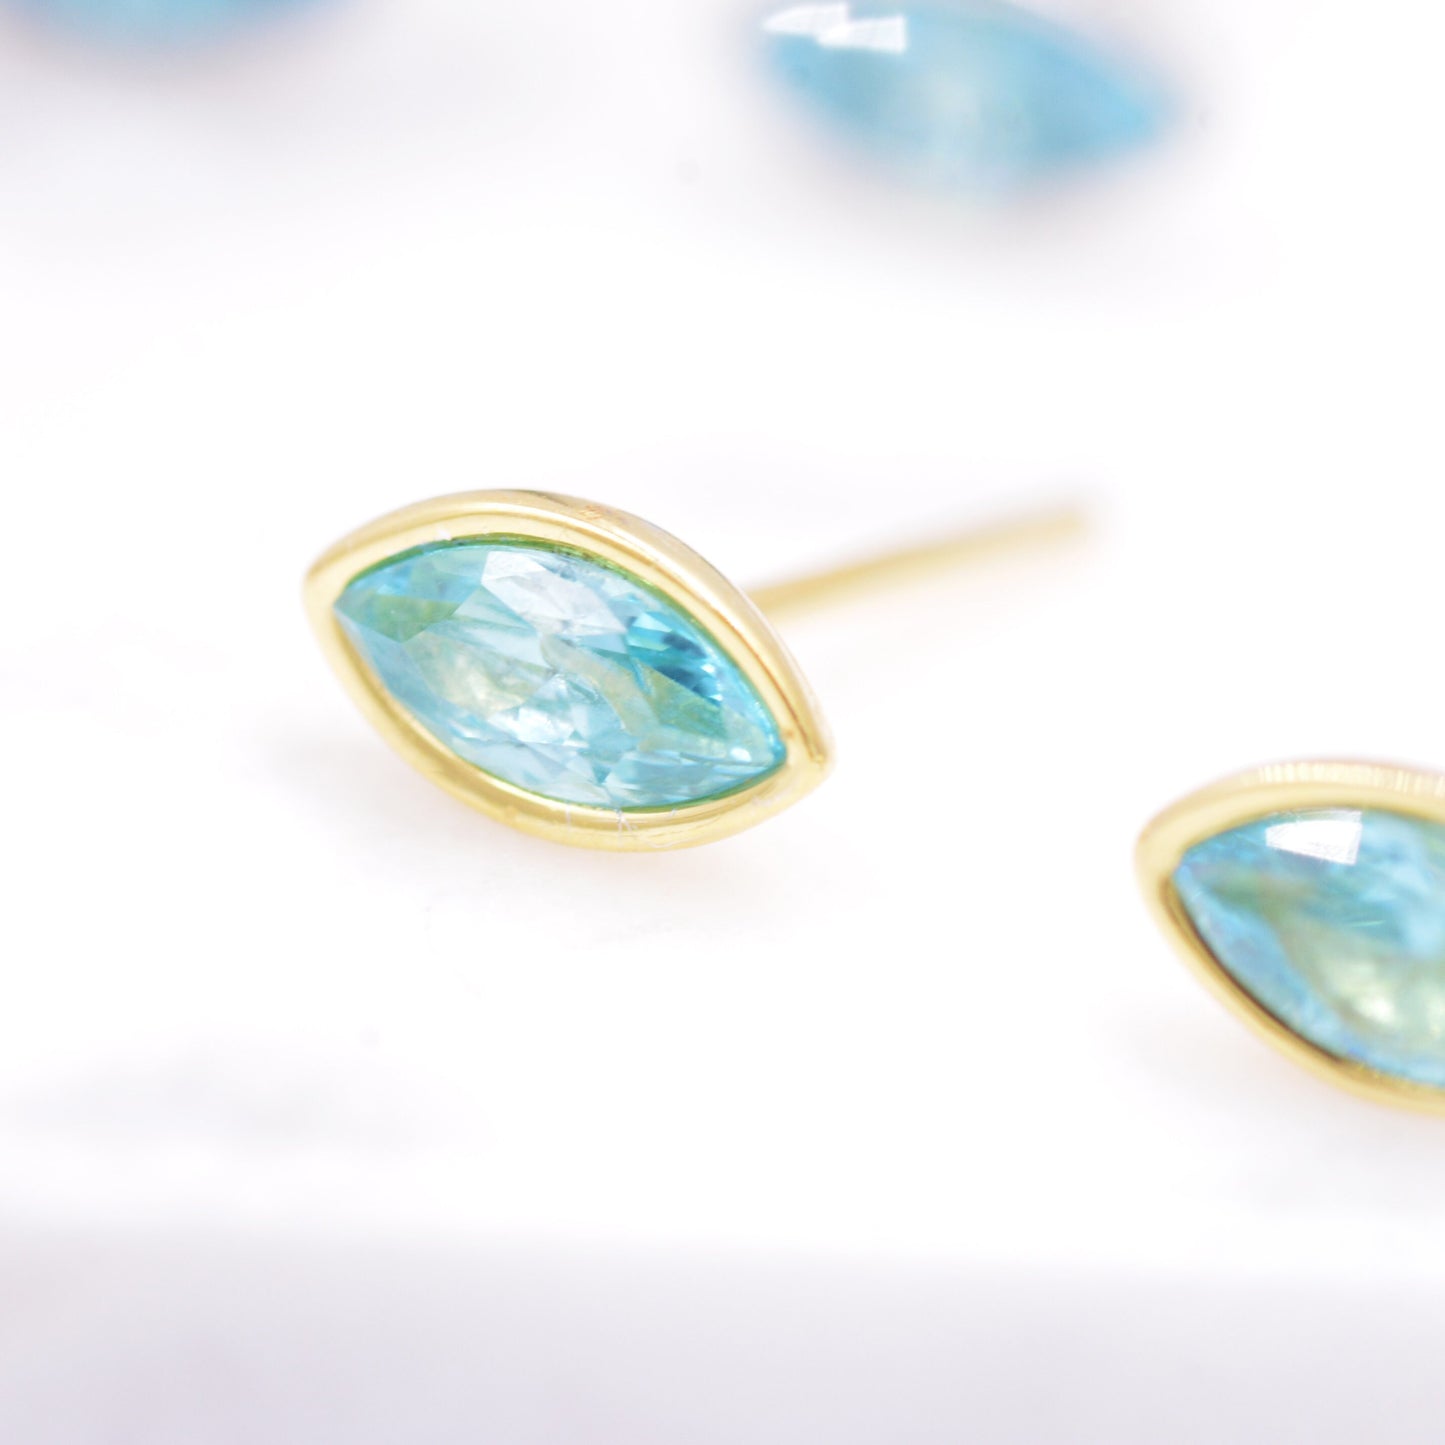 Blue Topaz Marquise Stud Earrings in Sterling Silver, Gold or Silver, Minimalist Geometric Design